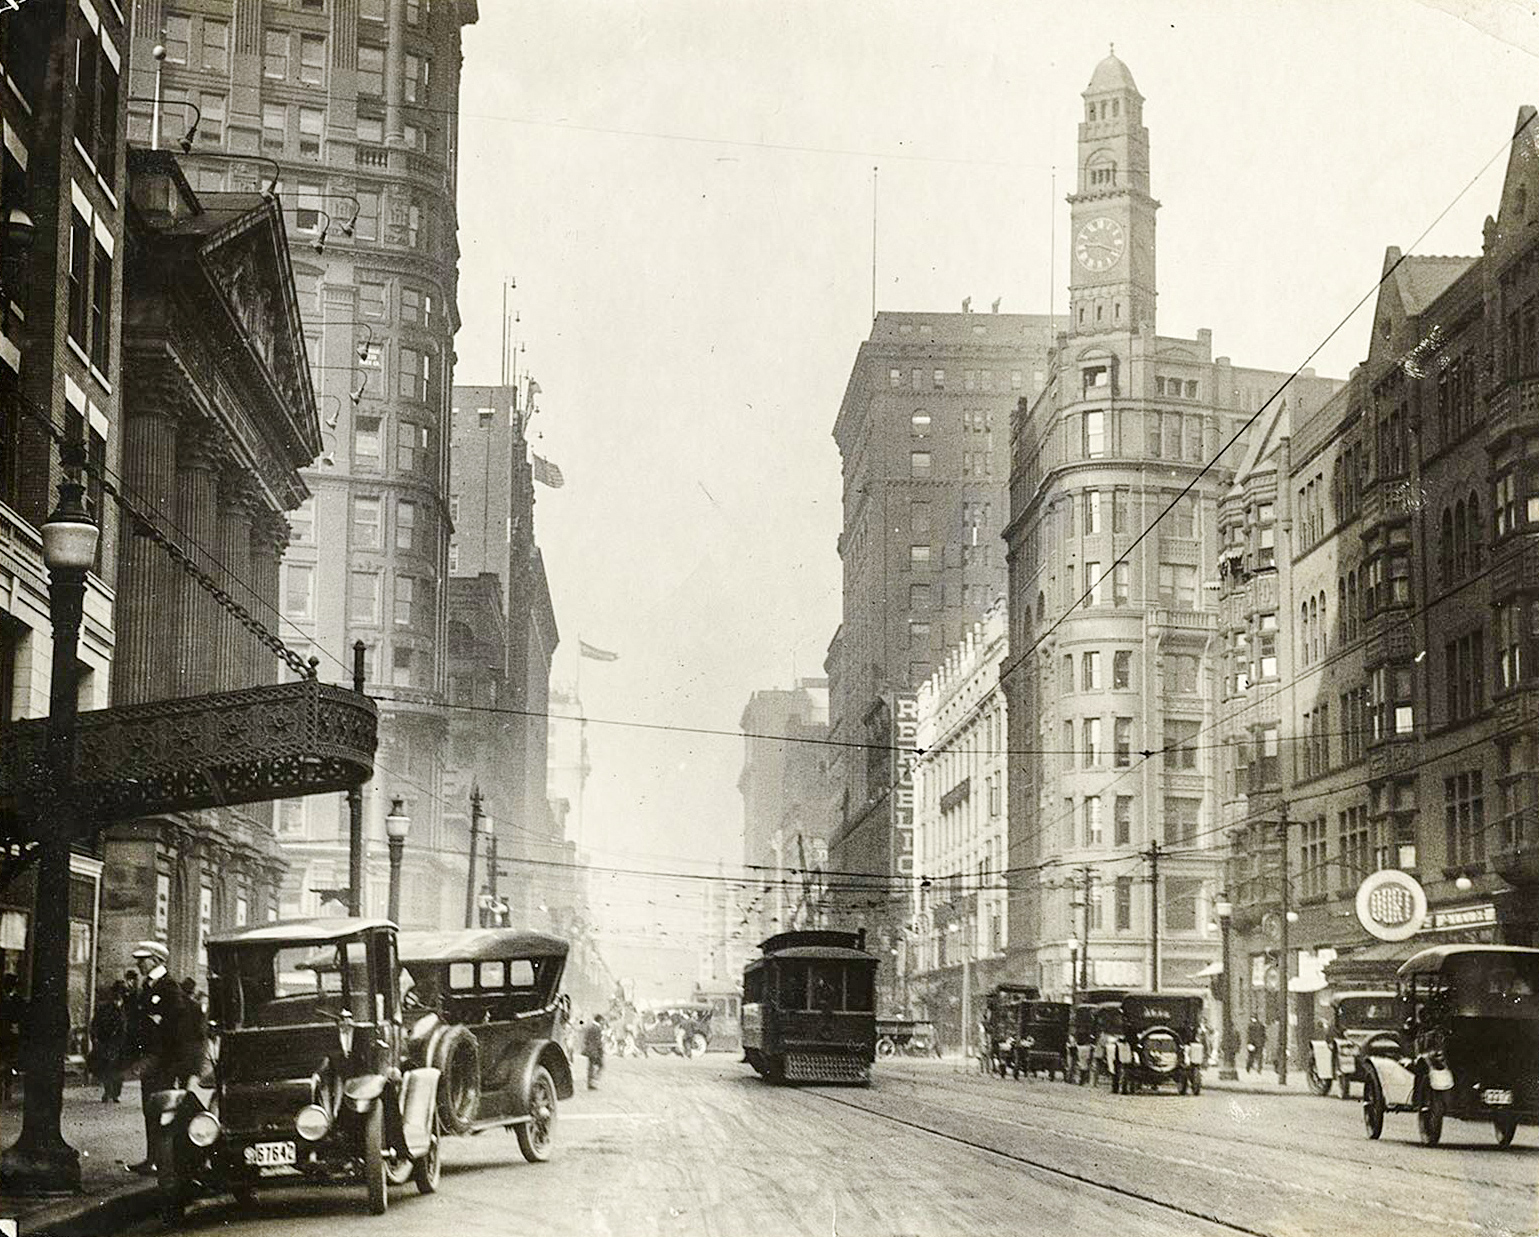 A city street packed with vehicles, streetcars, pedestrians, and a horse and buggy, surrounded by high-rise buildings